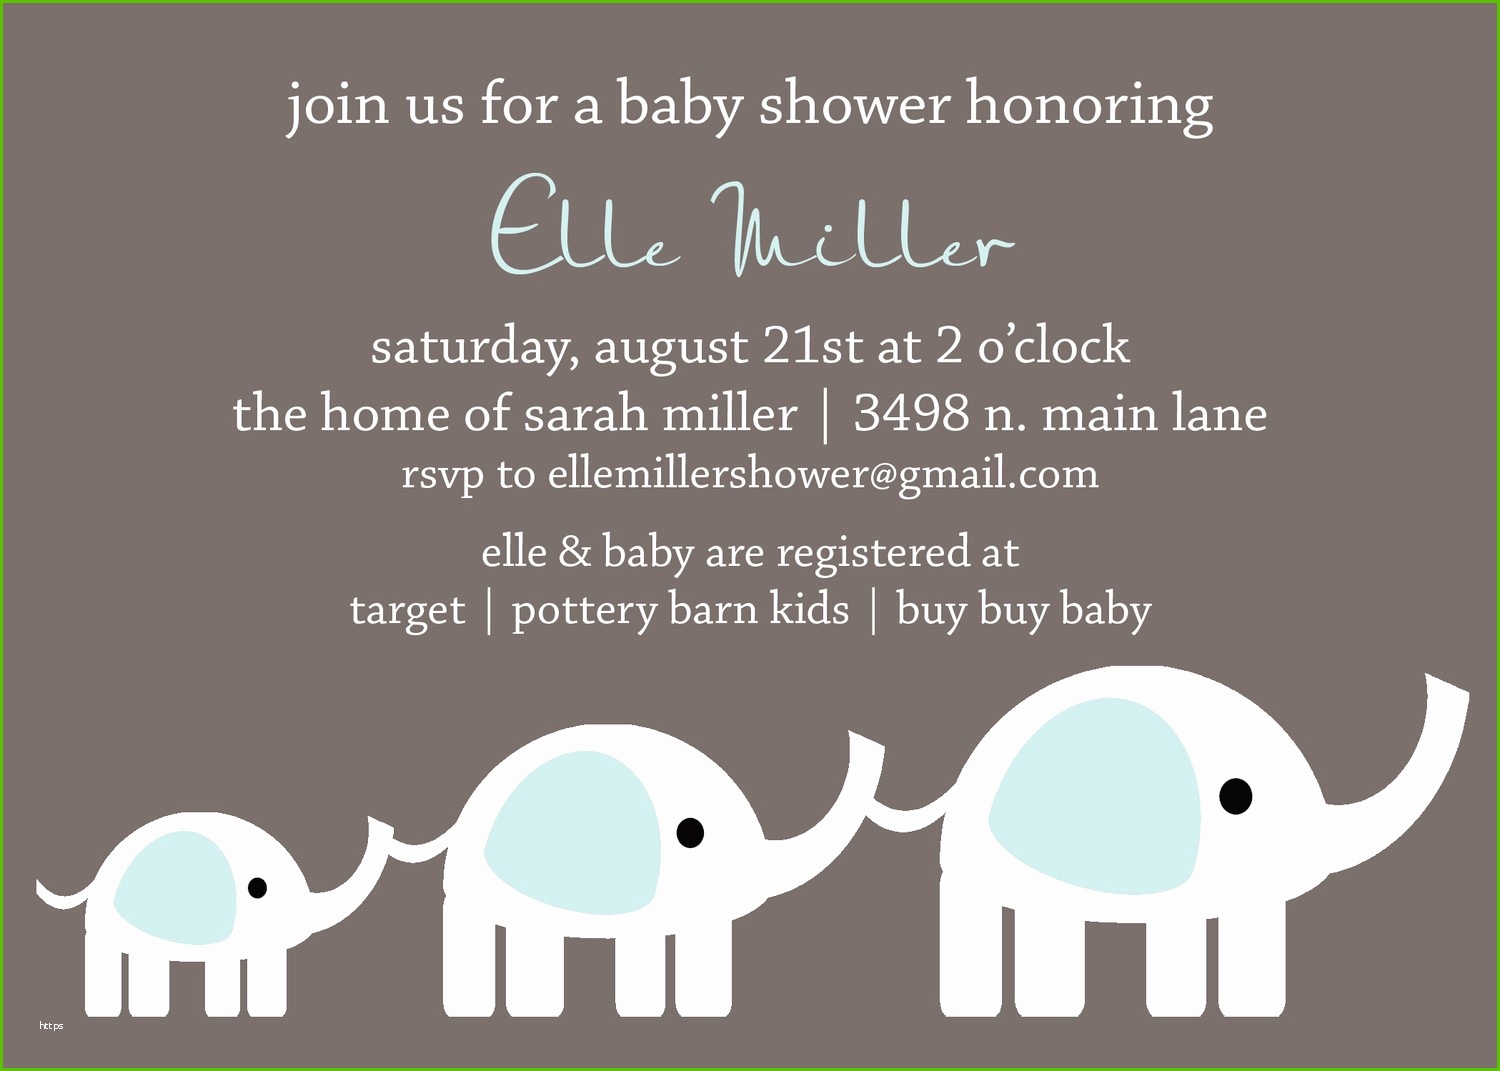 Full Size of Baby Shower:inspirational Elephant Baby Shower Invitations Photo Concepts Elephant Baby Shower Invitations And Noah's Ark Baby Shower With Baby Shower Theme Ideas Plus Baby Shower Messages Together With Baby Shower Favor Ideas As Well As Unique Baby Shower Gifts